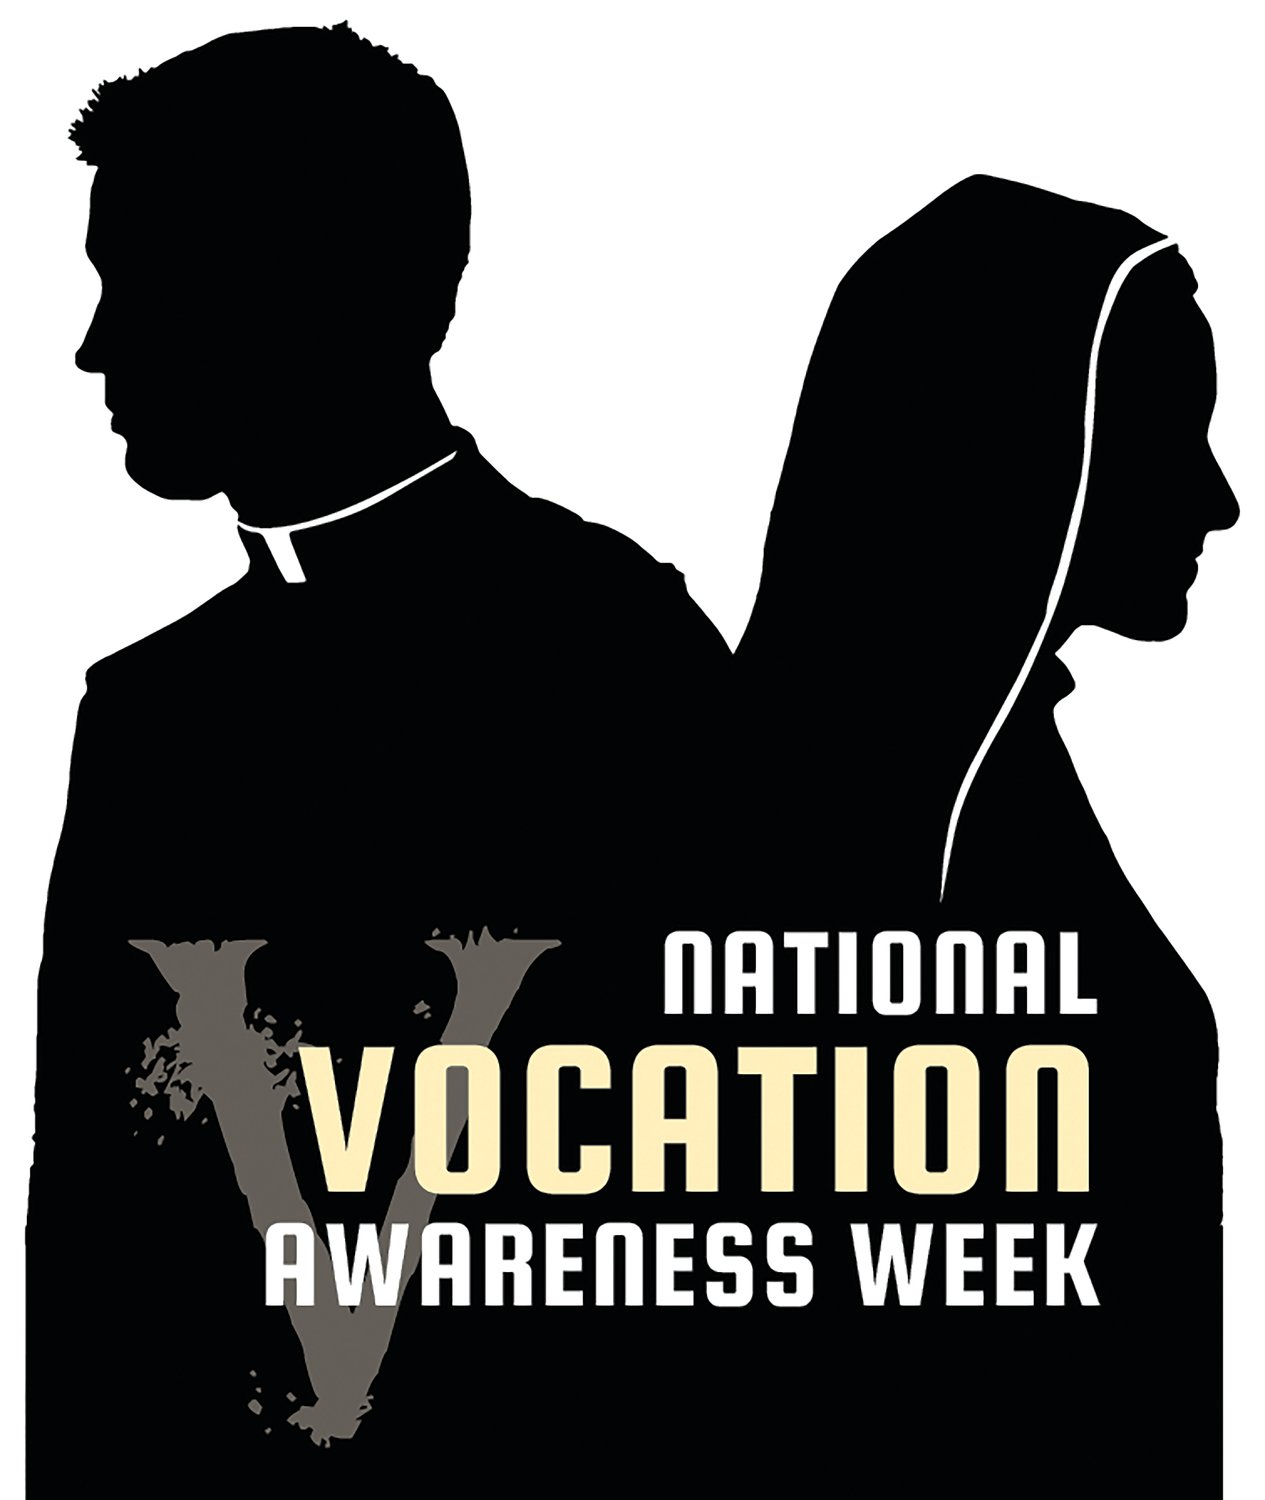 Dioceses across U.S. preparing to observe National Vocation Awareness